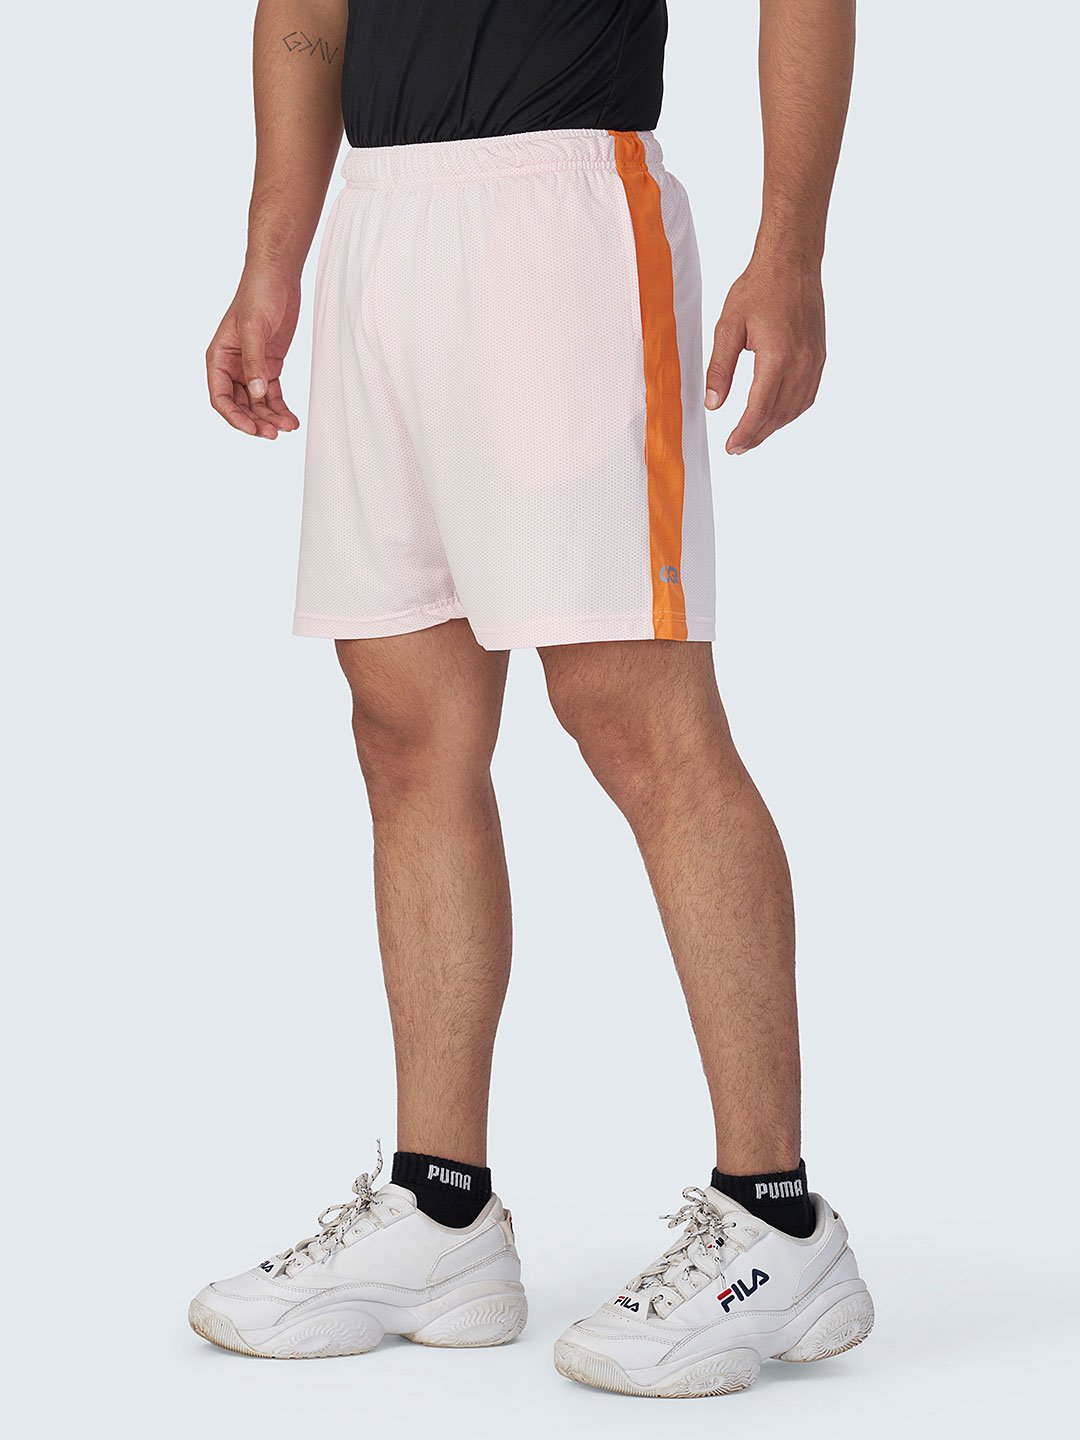 Men's Active Sports Shorts with Side Stripe